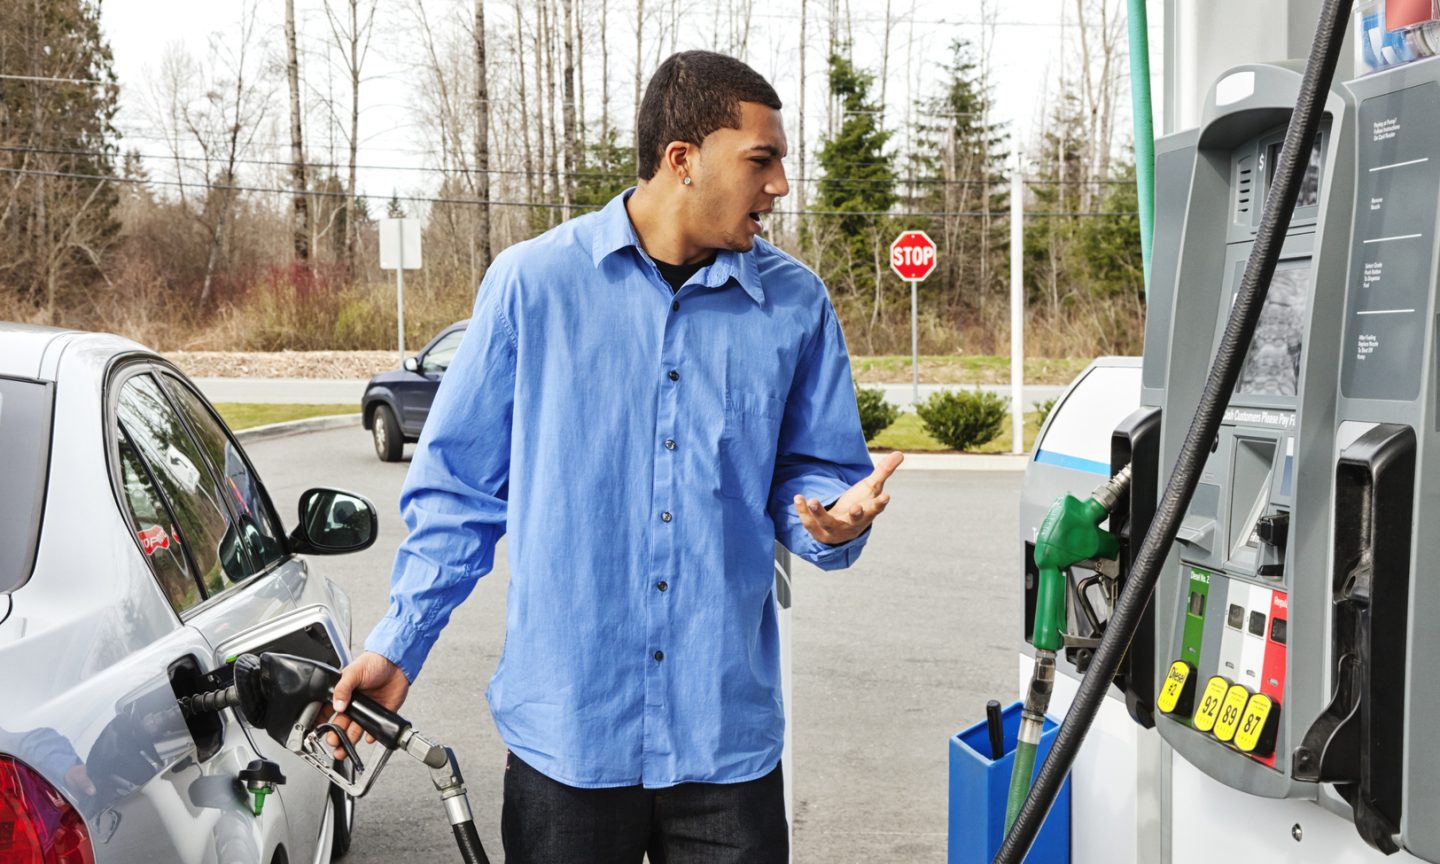 Are You Able to Pay $5 a Gallon for Gasoline? – NerdWallet